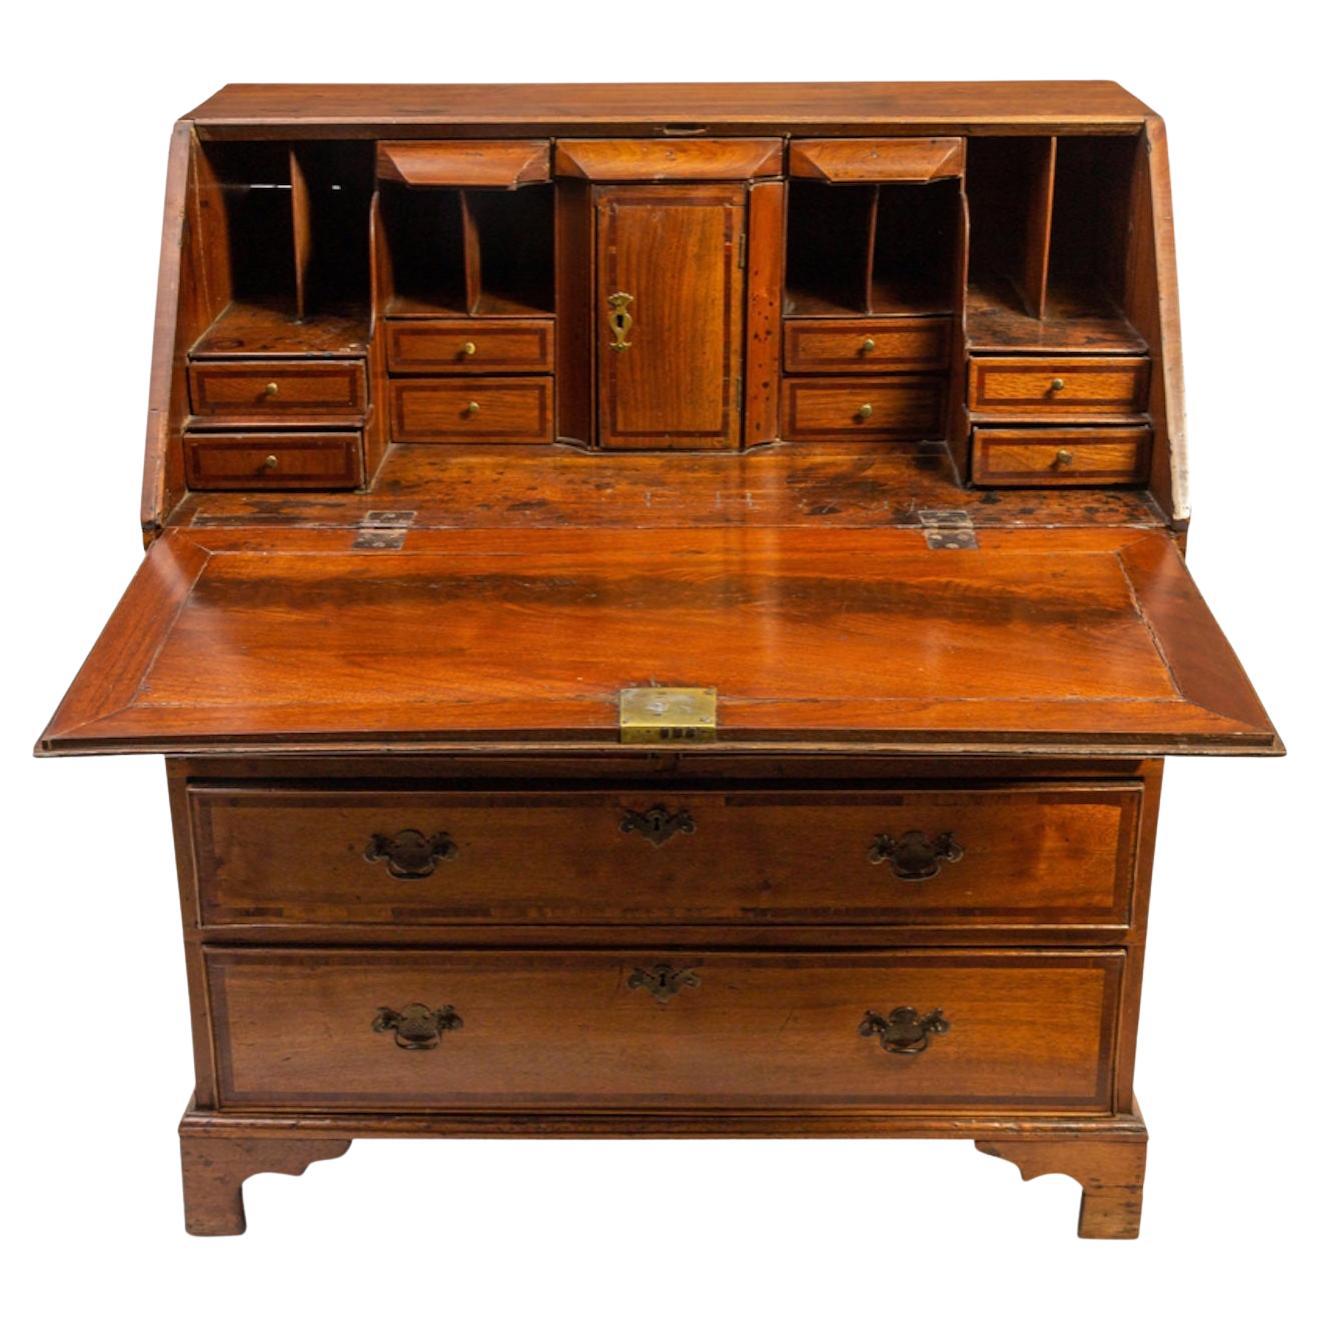 An American Slant Front Desk 19th Century Height 44 x width 37 x depth 21 inches For Sale